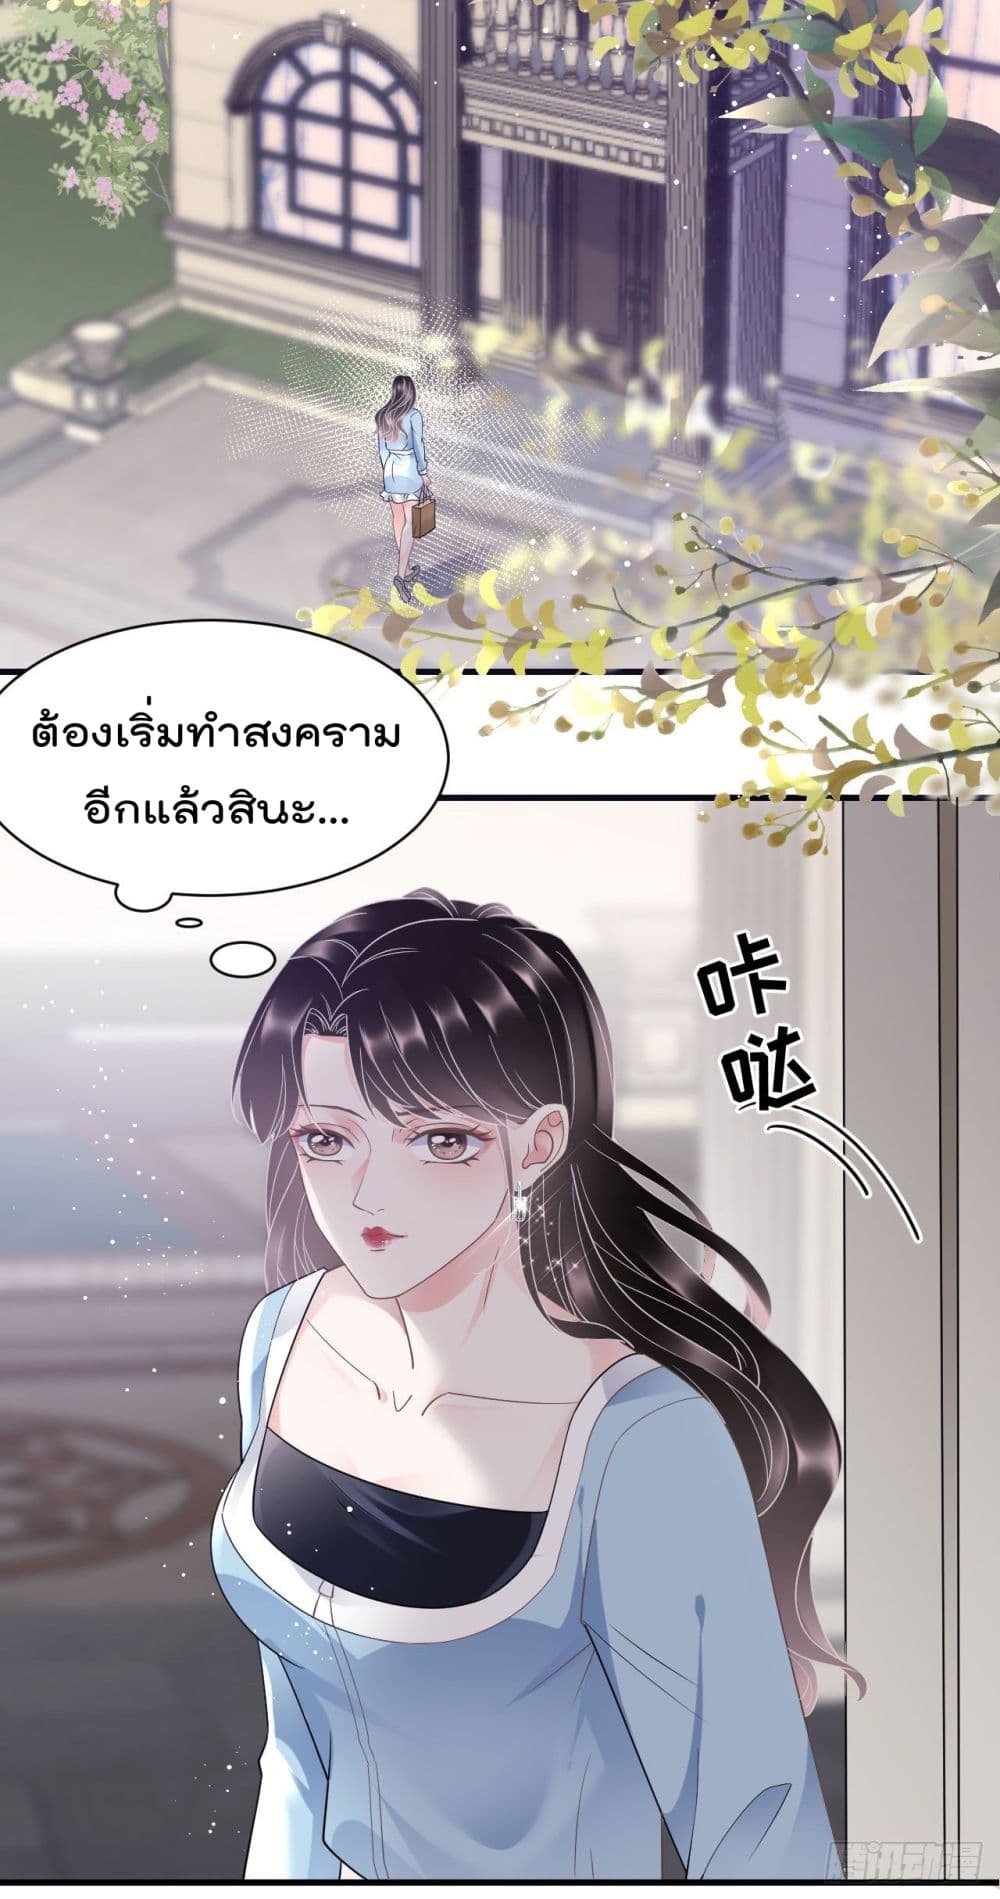 What Can the Eldest Lady Have คุณหนูใหญ่ ทำไมคุณร้ายอย่างนี้ 12-12